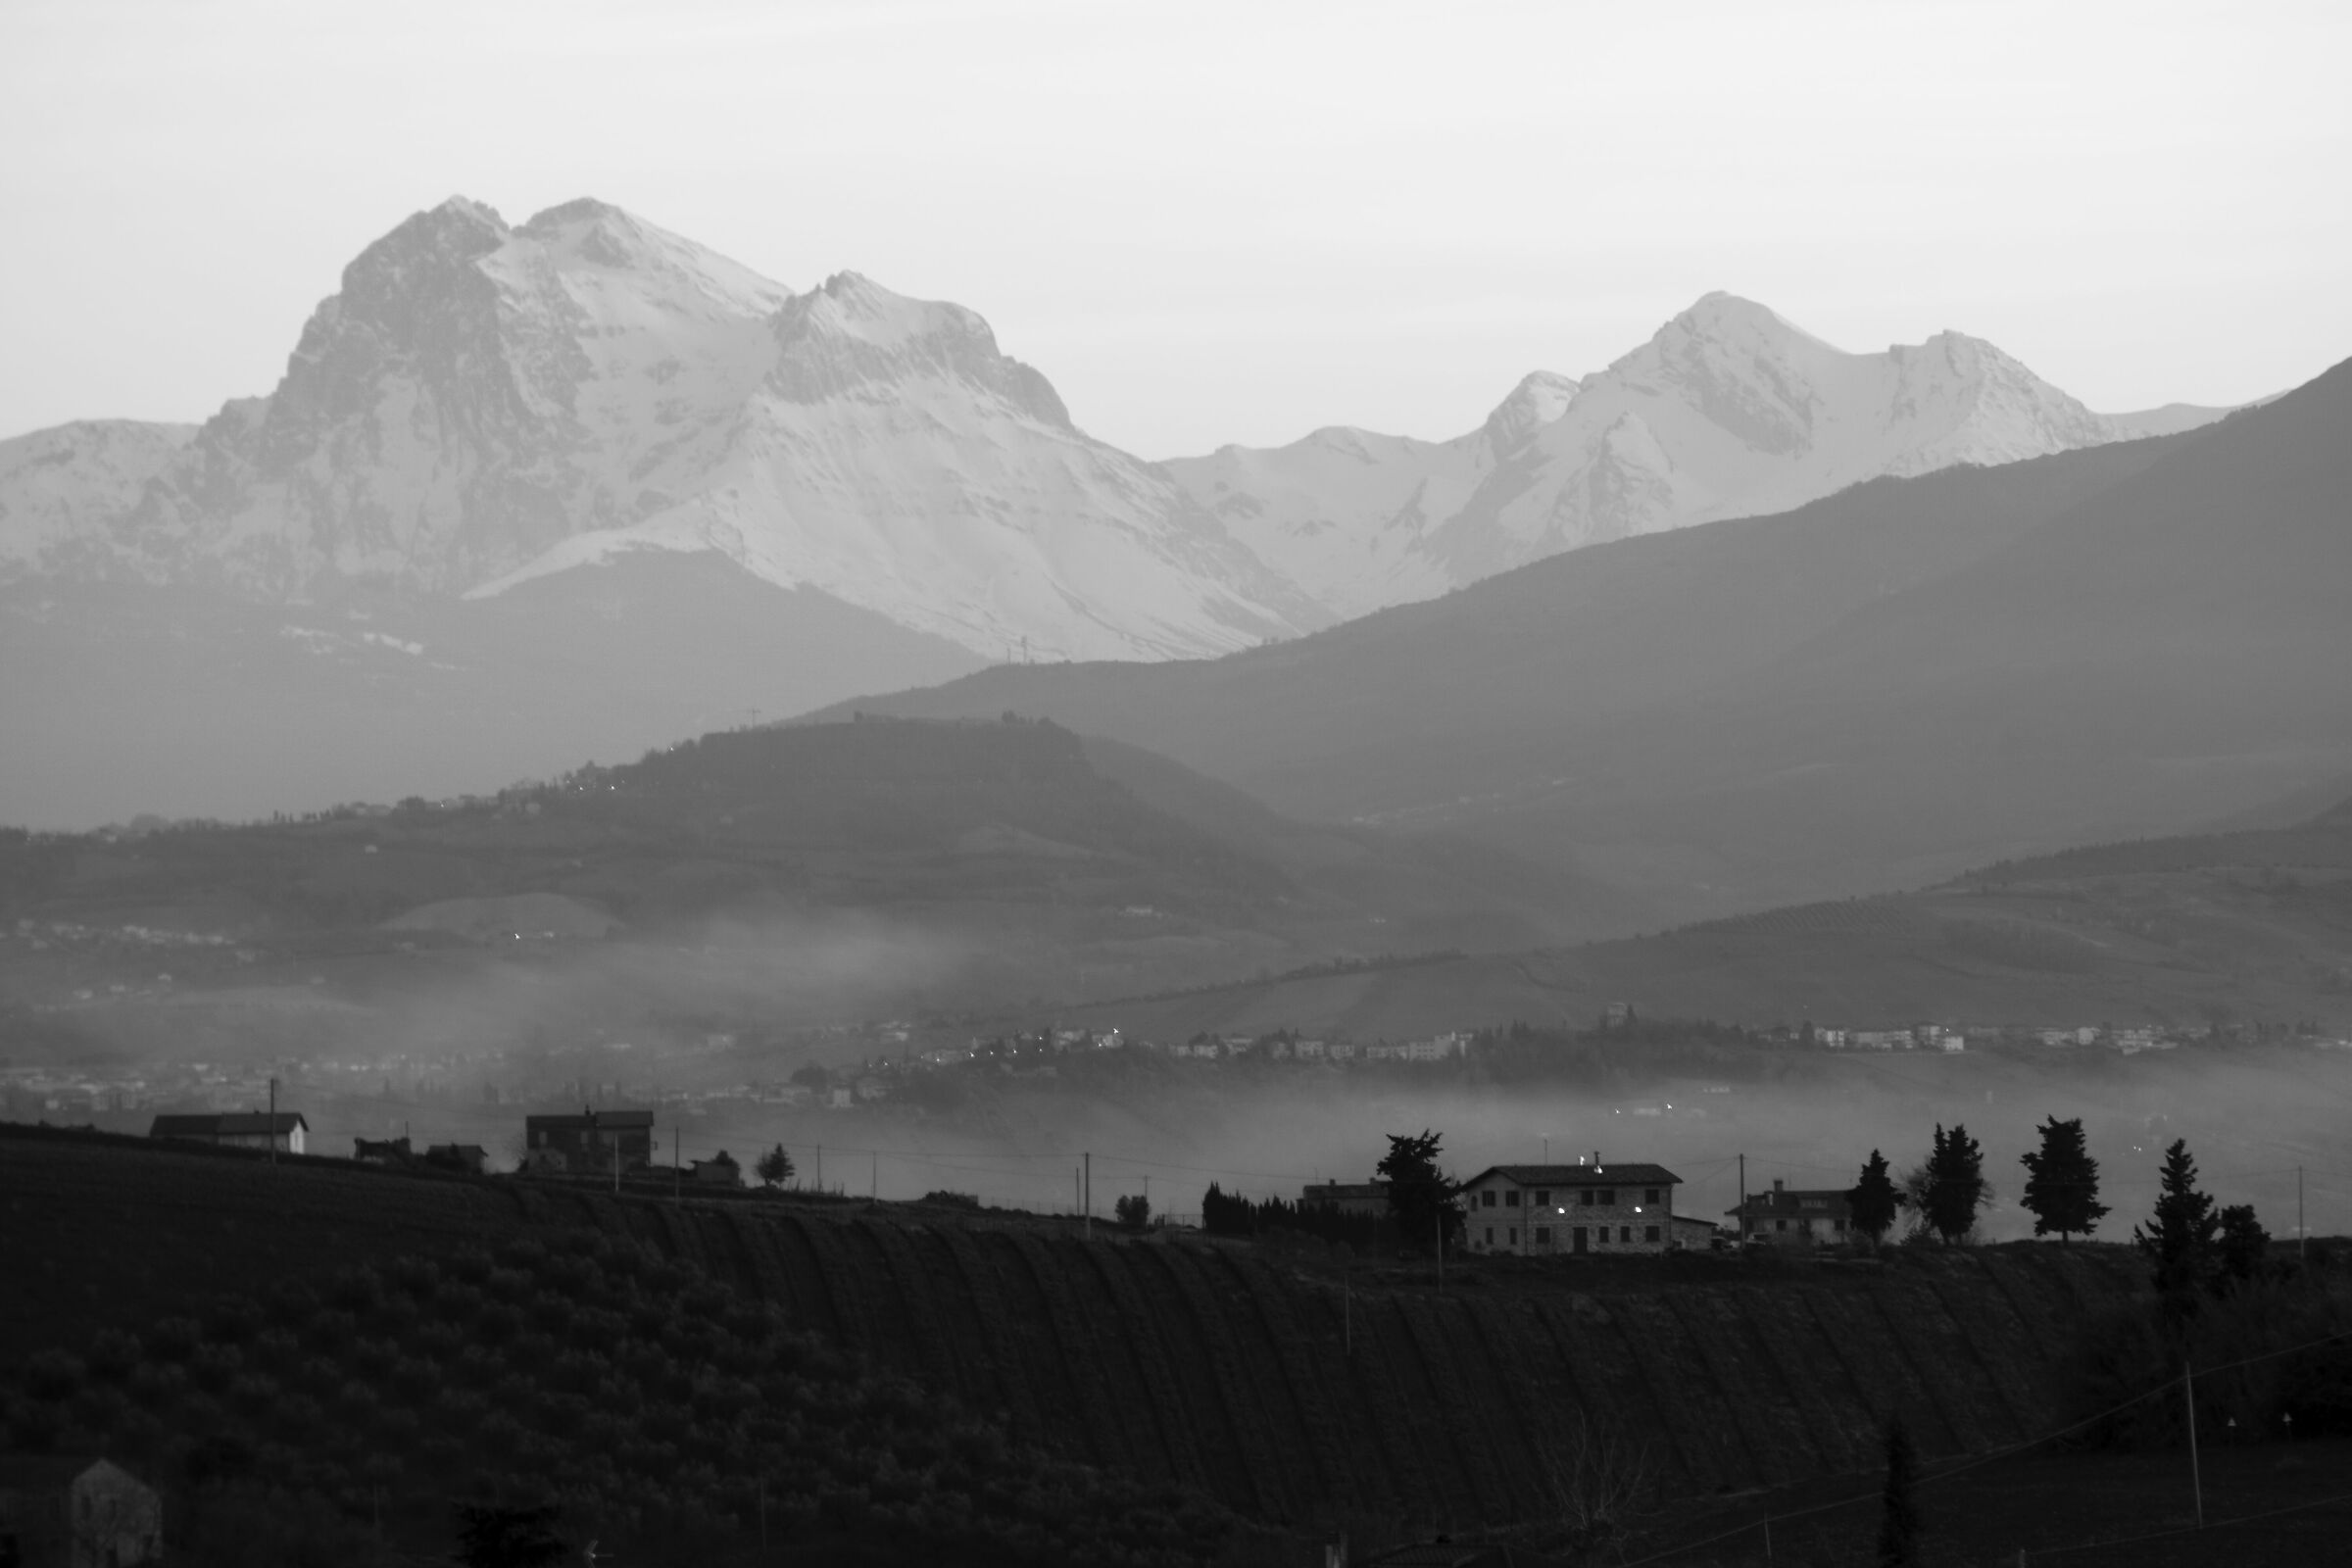 The Gran Sasso from afar...